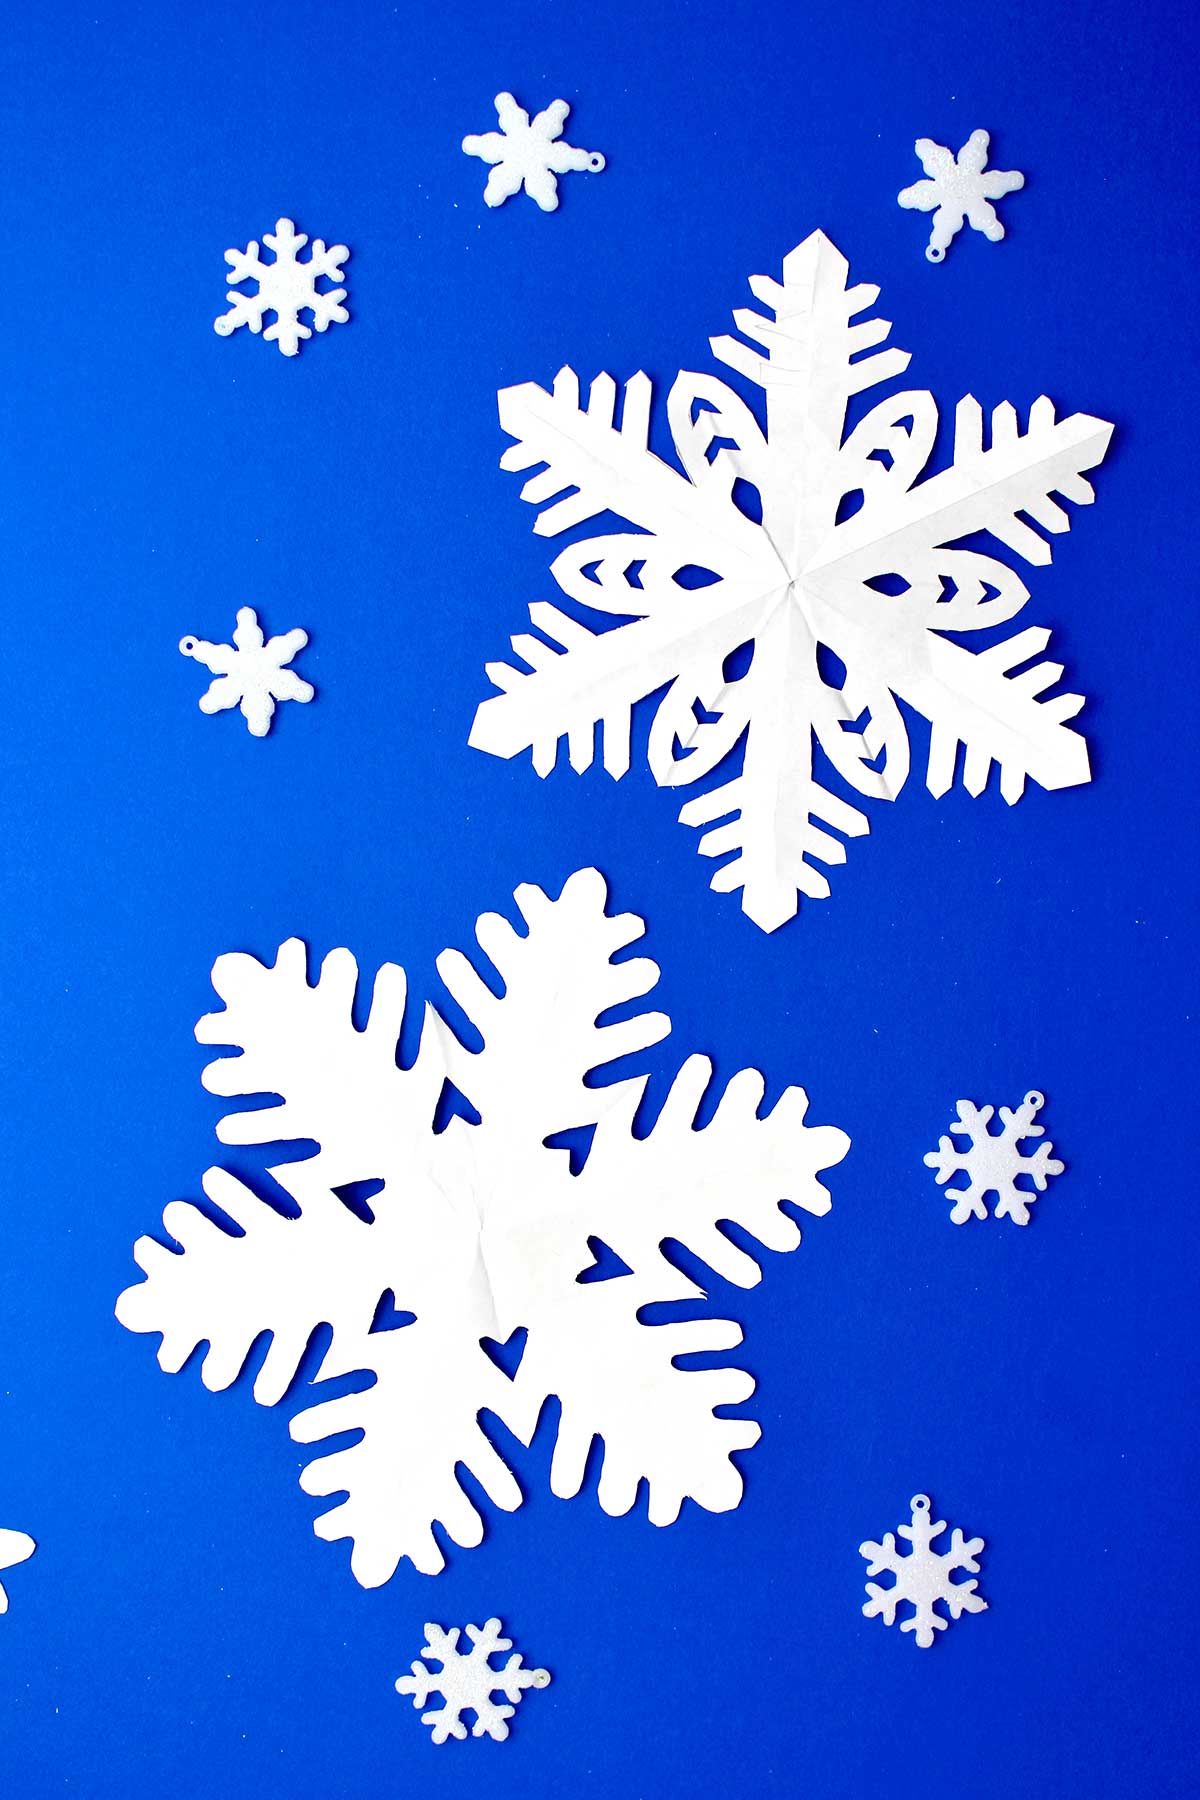 Two completed snowflakes made from white paper resting on blue background.